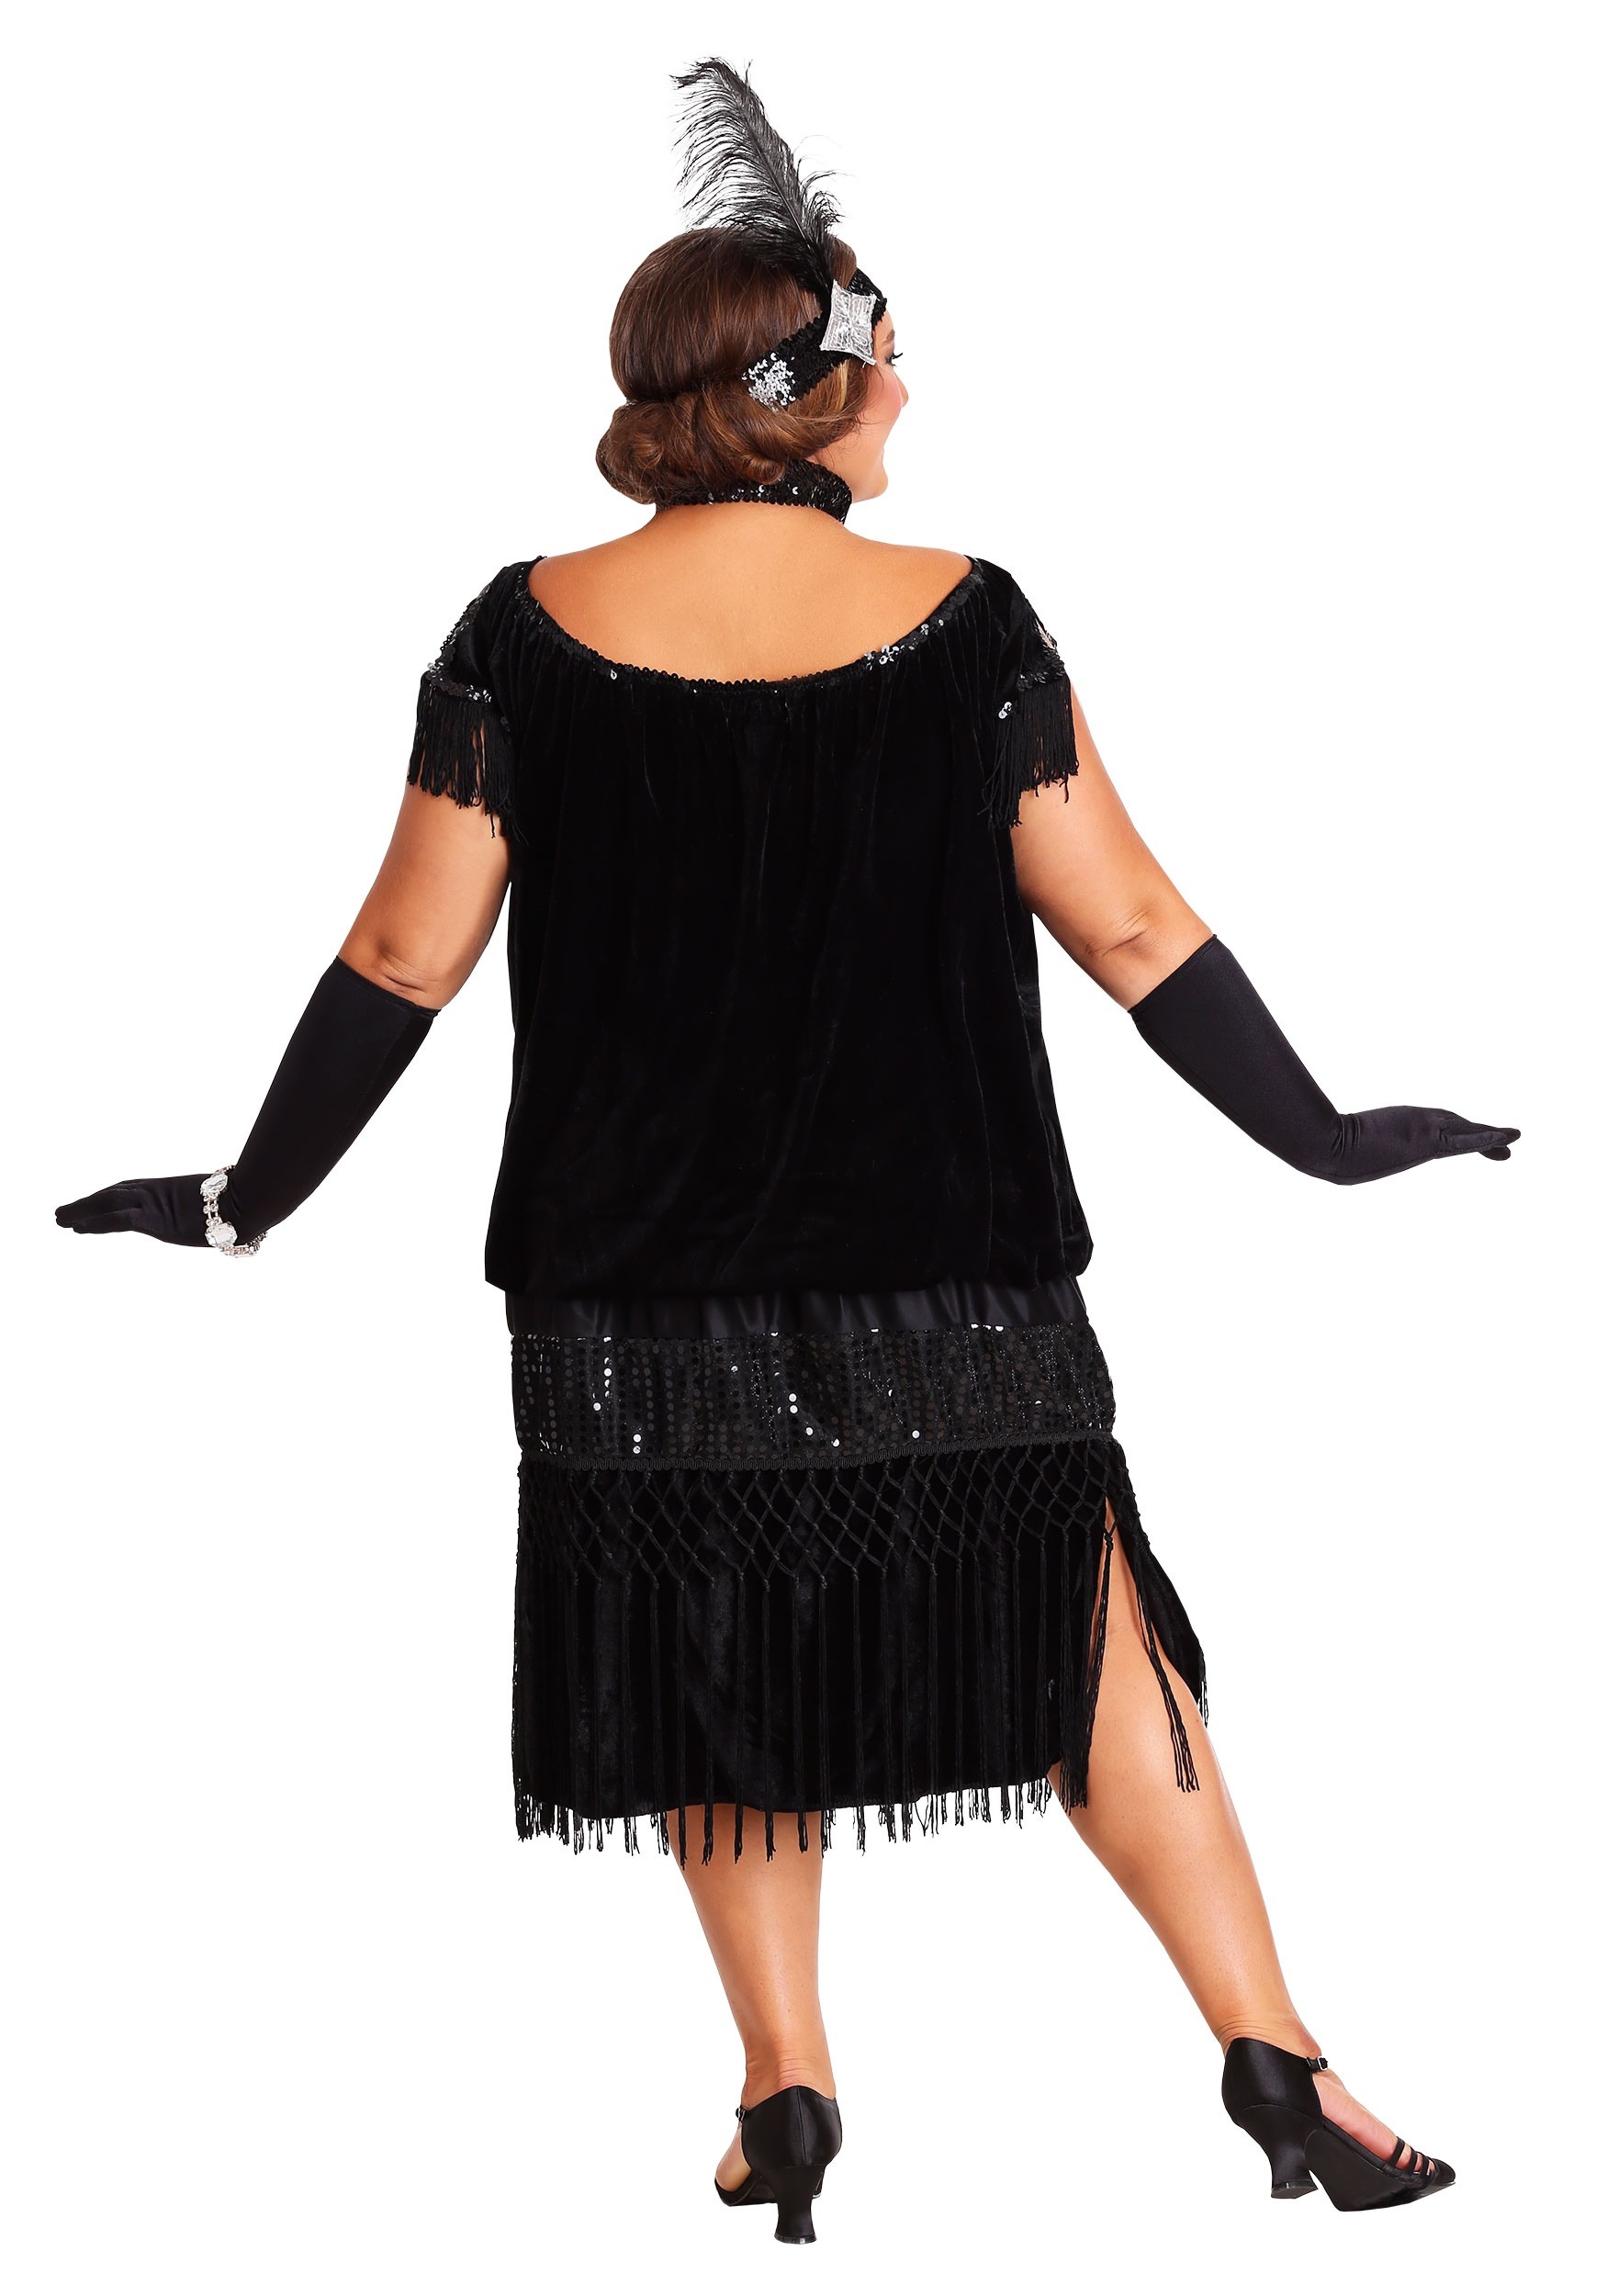 Gods Email Stavning Deluxe Black Flapper Plus Size Costume for Women | 20s Decade Costumes